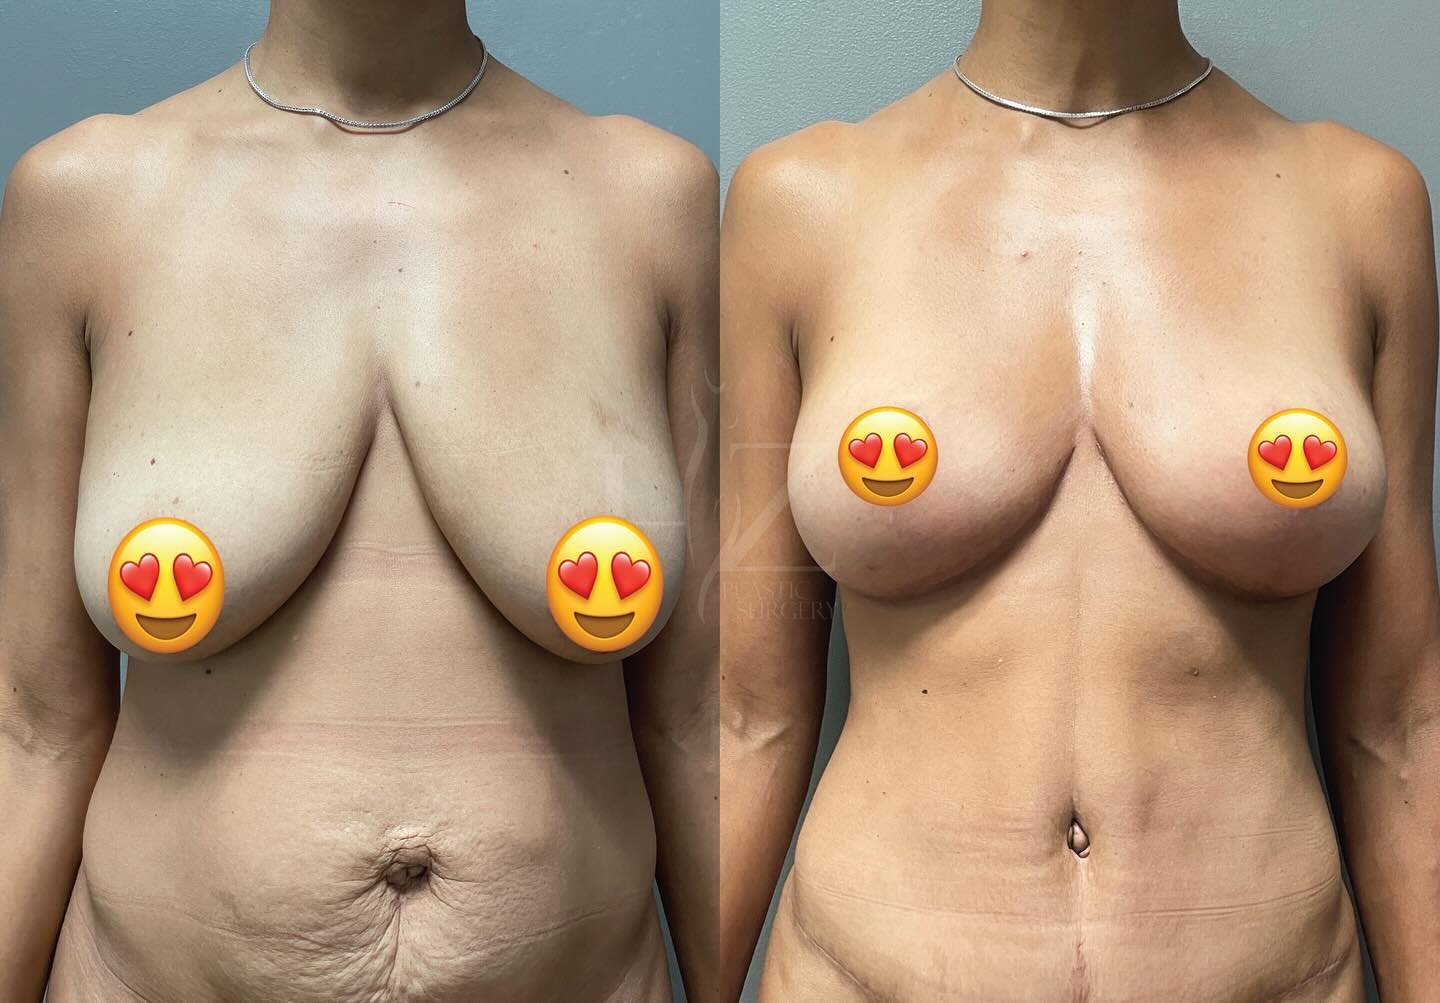 A moment for her breast transformation ✨😍 
Our beautiful patient, a 44-year-old mom of 2, received a stunning breast lift without implants by @drlylyhzps! She also underwent a tummy tuck and liposuction on the waist. These amazing results are just 3